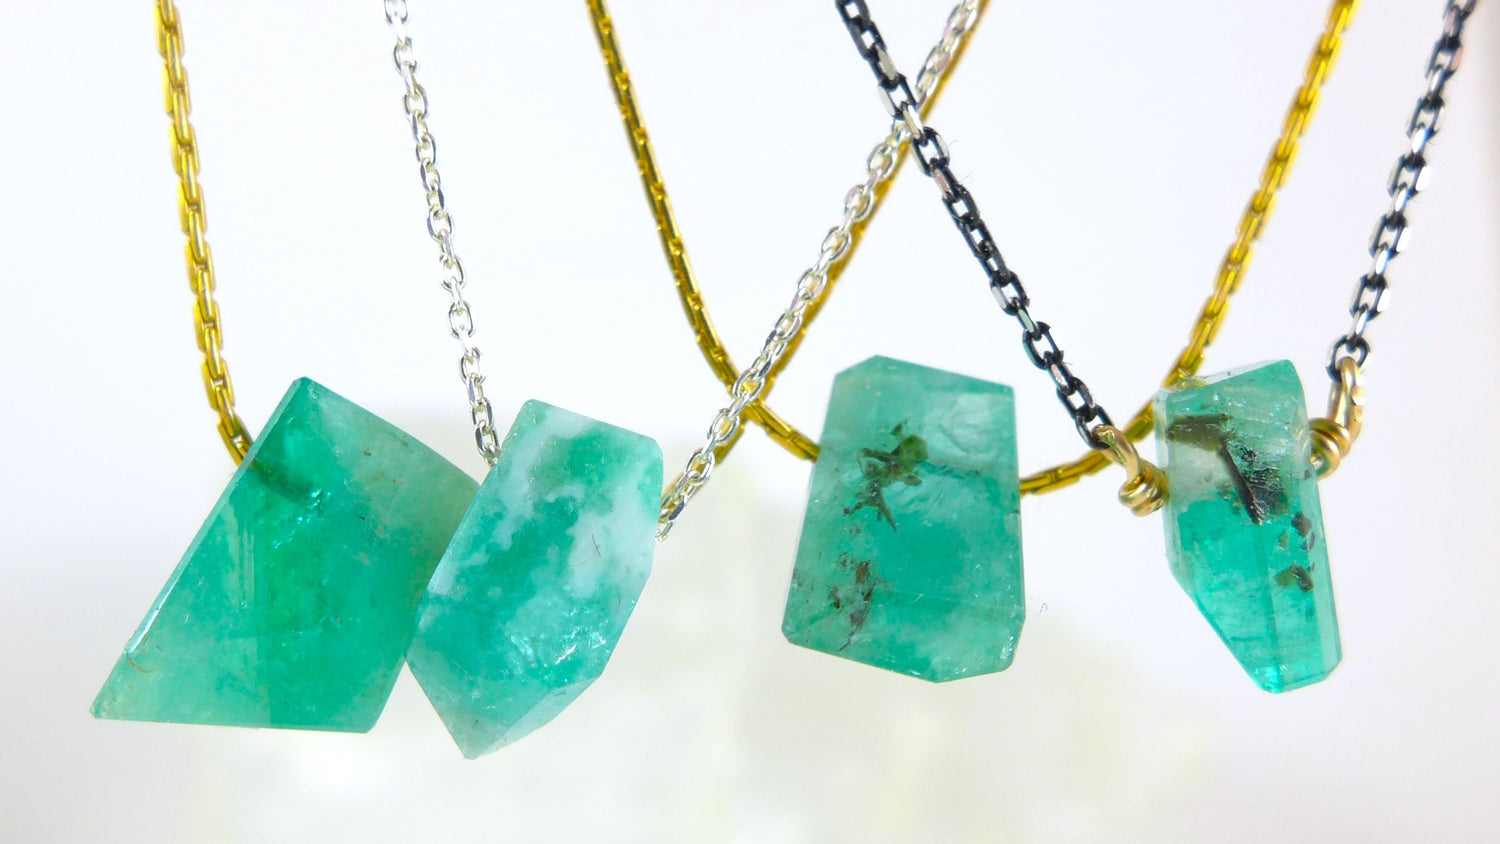 Emerald - The Birthstone for May